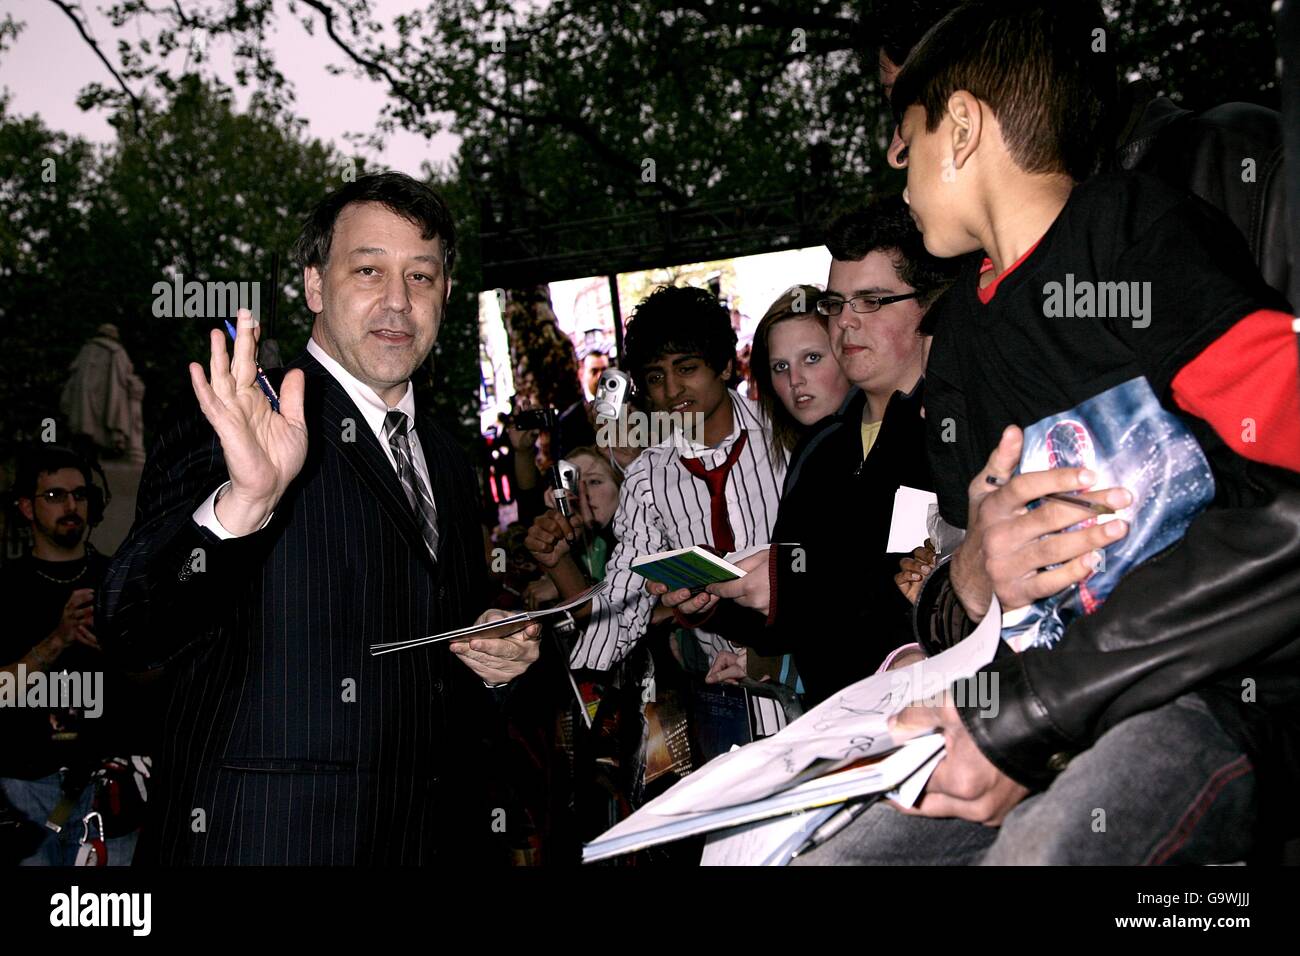 Sam Raimi arrives for the UK Gala Premiere of Spiderman 3 at the Odeon Cinema in Leicester Square, central London. PRESS ASSOCIATION Photo. Picture date: Monday 23 April 2007. See PA story SHOWBIZ Spiderman. Photo credit should read: Yui Mok/PA Wire Stock Photo